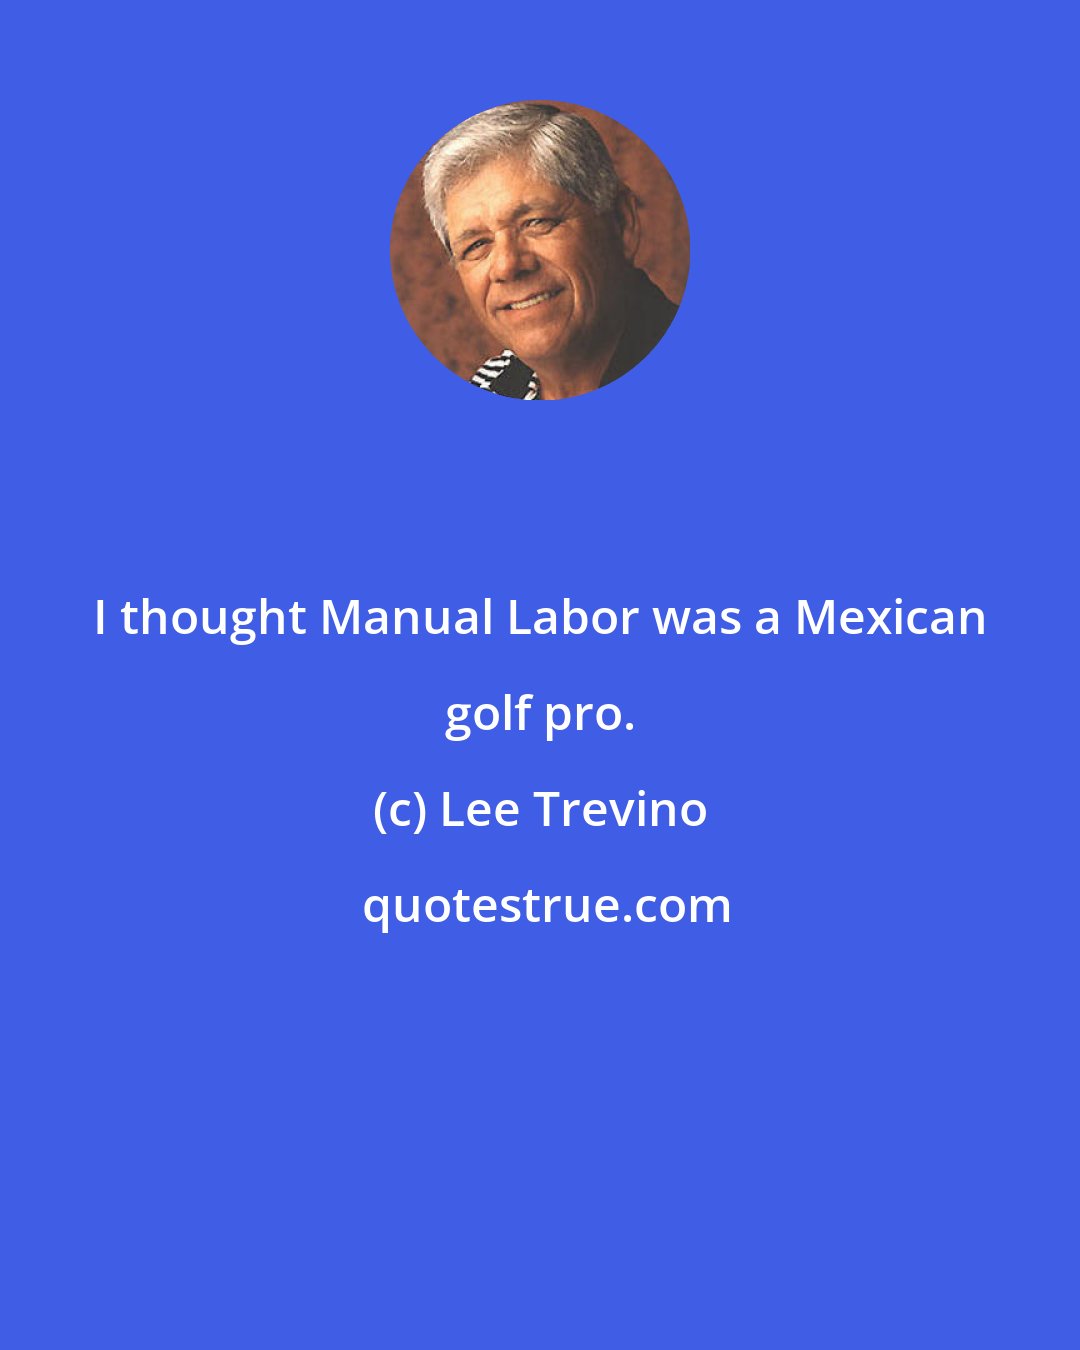 Lee Trevino: I thought Manual Labor was a Mexican golf pro.